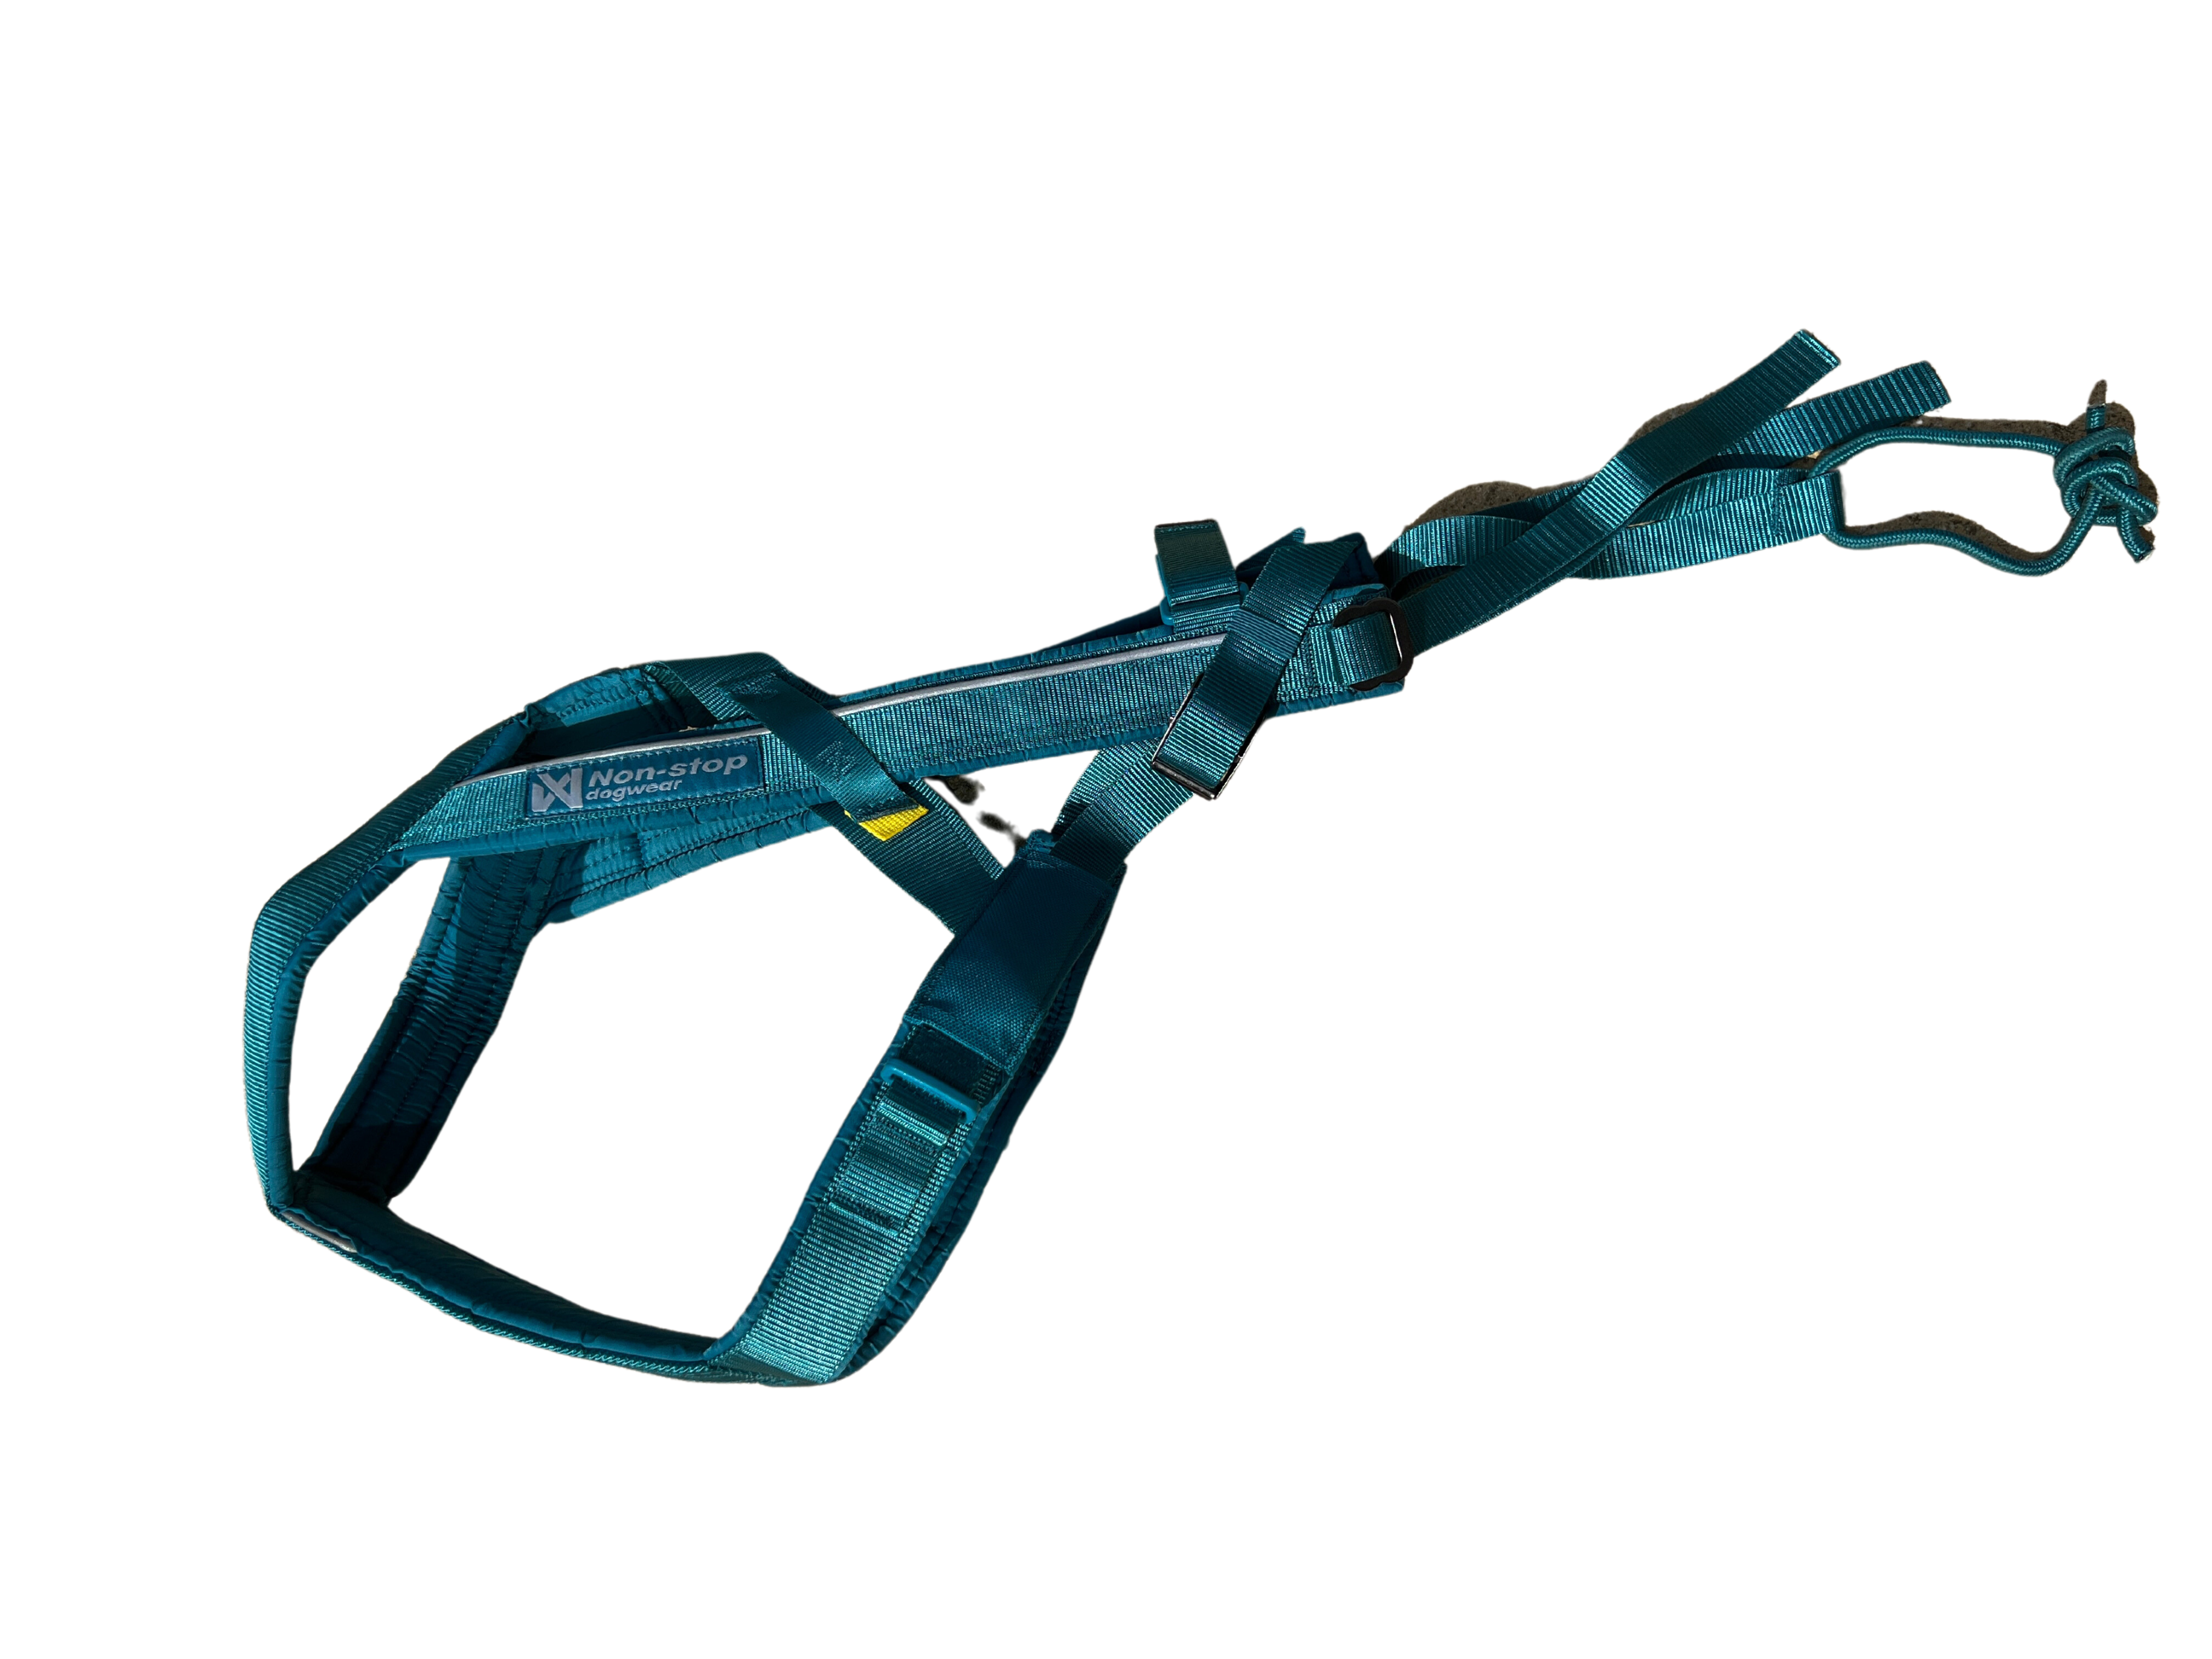 Non-Stop Freemotion Harness 5.0 in Teal